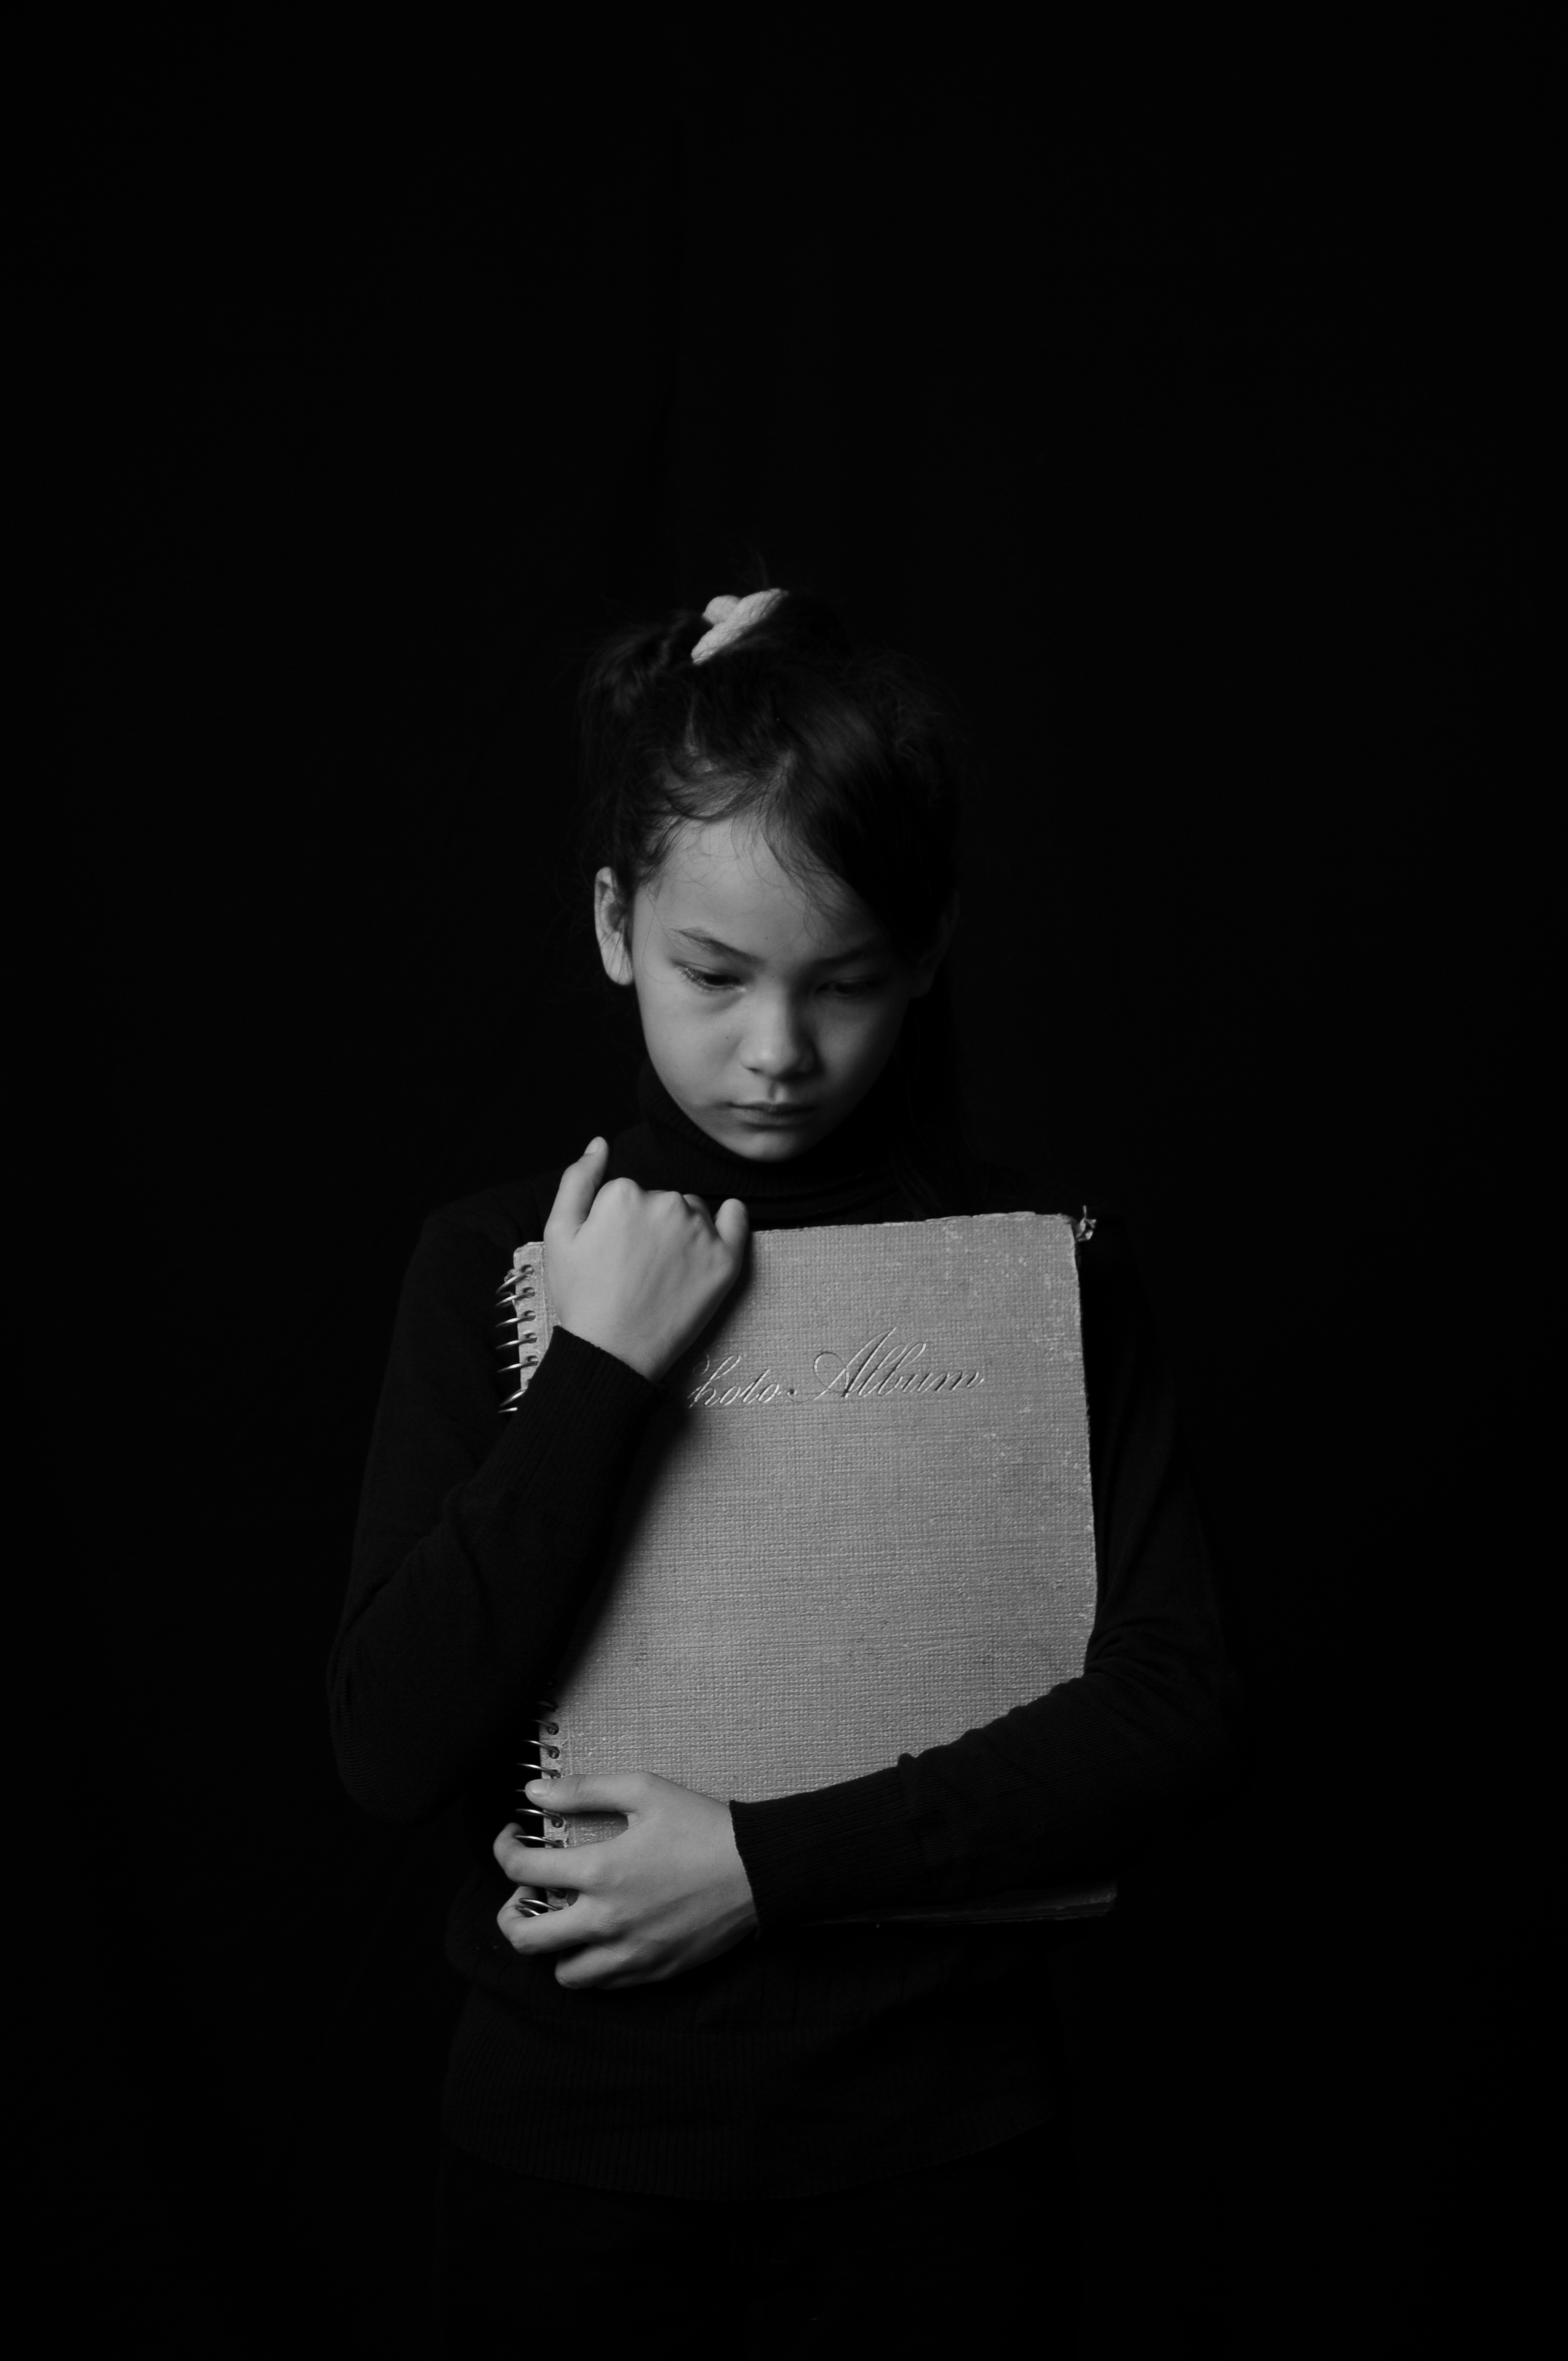 A young girl hugging a book against her body in a black and white photo